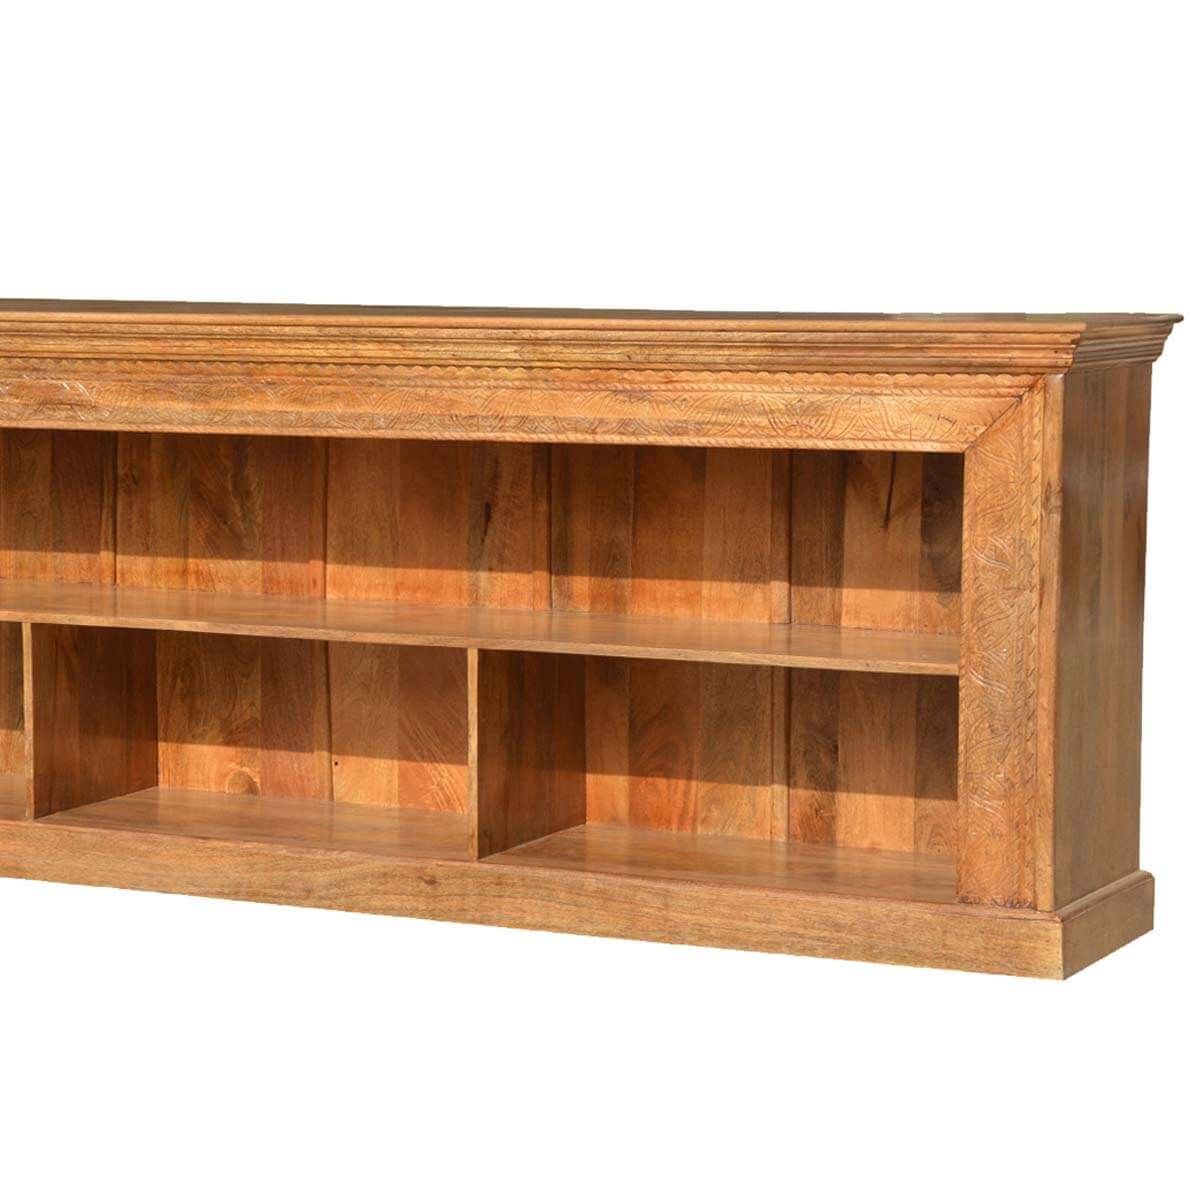 Large Hand Carved Solid Wood Bookcase 150" Long Tv Stand Media Pertaining To Long Wood Tv Stands (Photo 6 of 15)